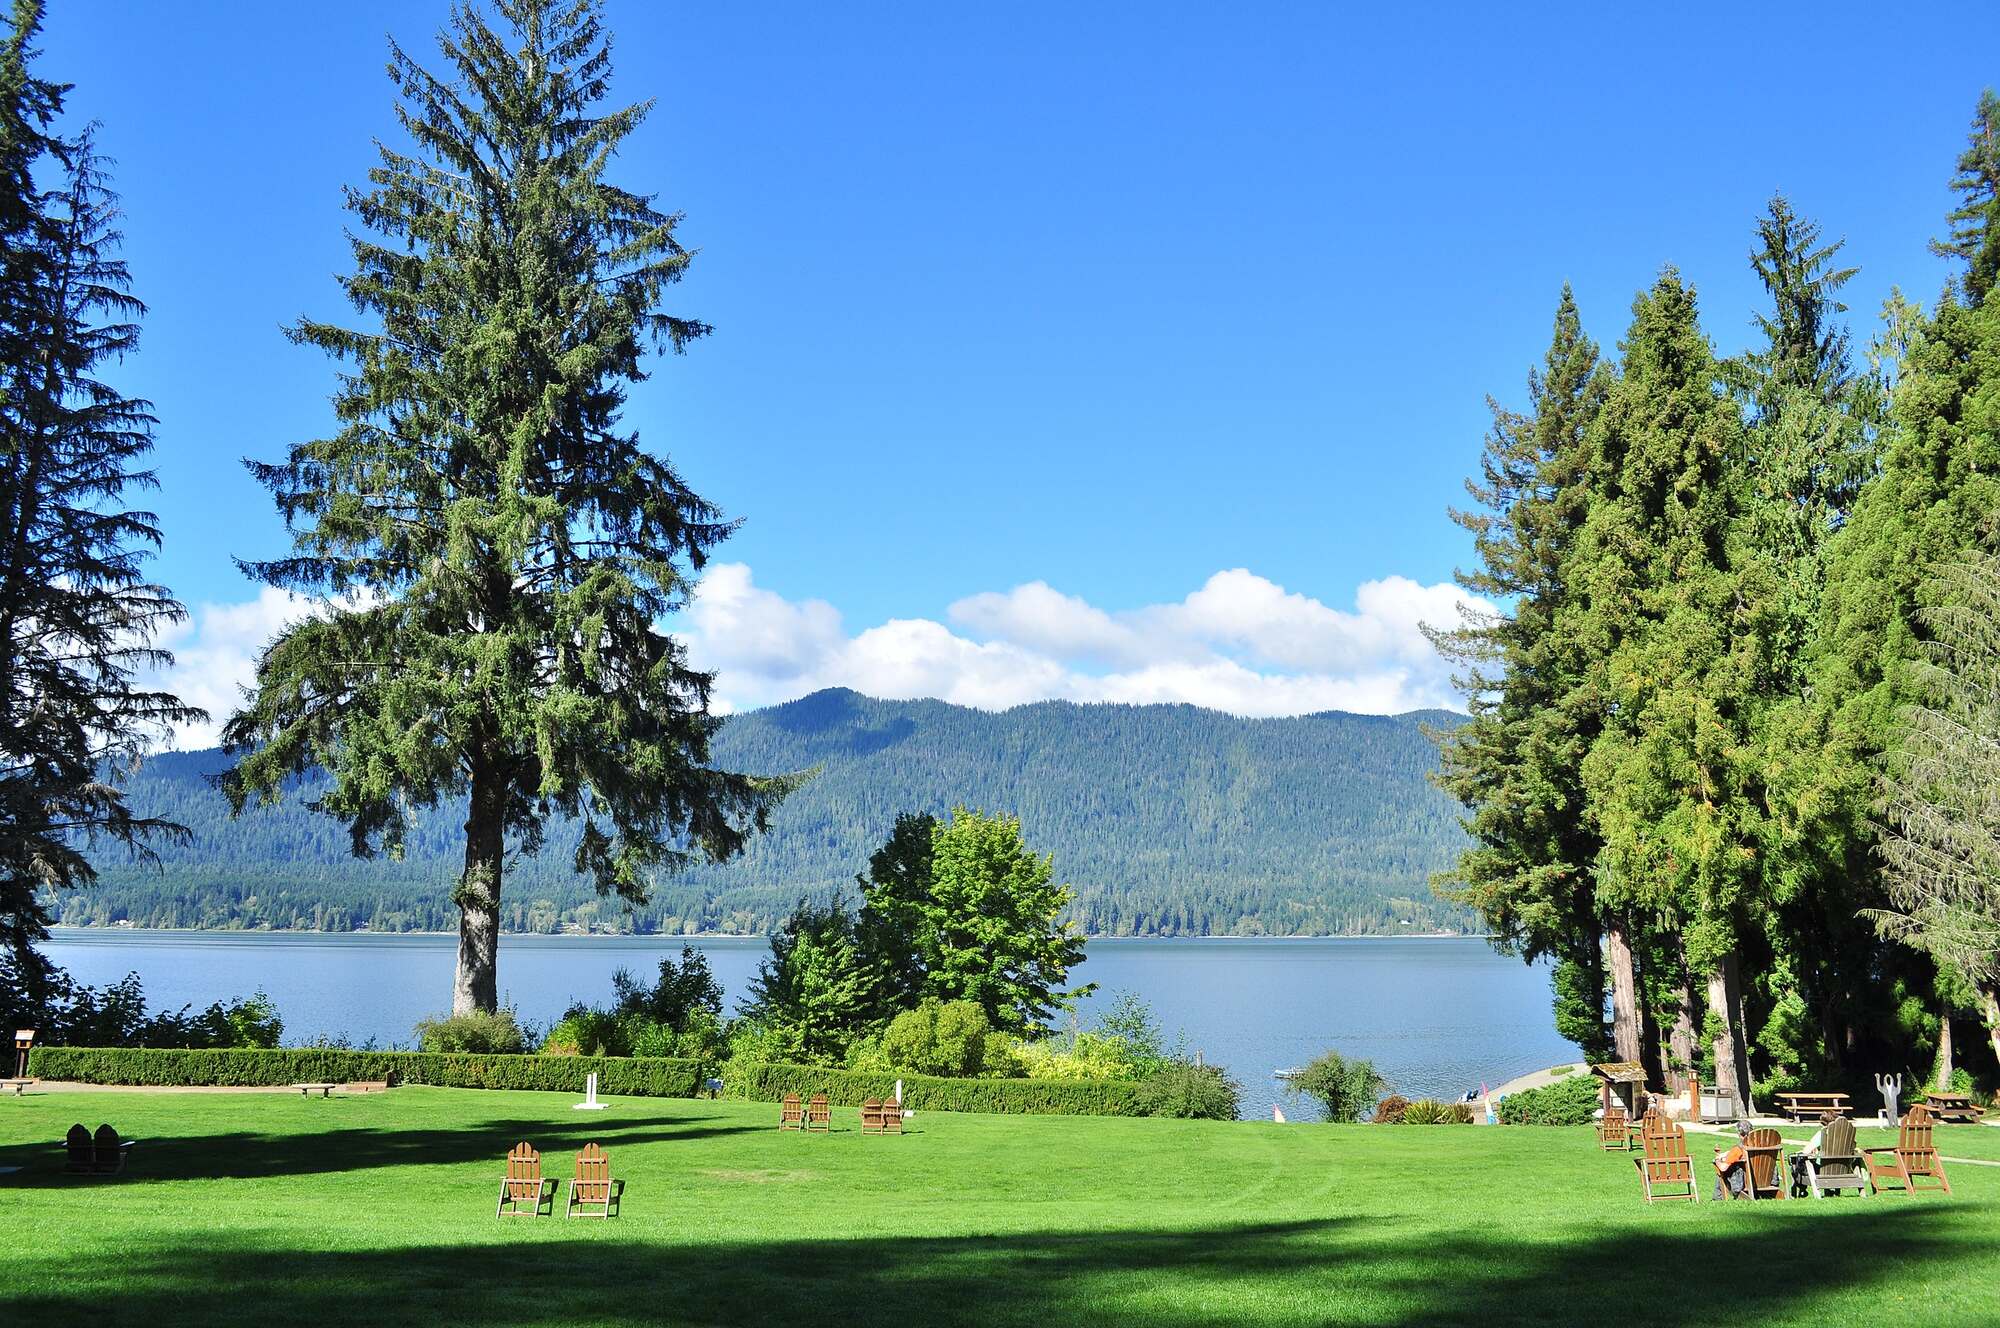 Photograph of a lakeside lawn in Washington state, U.S.A. The photo shows a mowed lawn with scattered chairs in the foreground, with a grow of trimmed hedges and scattered conifers at the edge. On the other side of the lawn, the water of a lake can be seen. A forested hill or mountain rises on the other side of the lake.